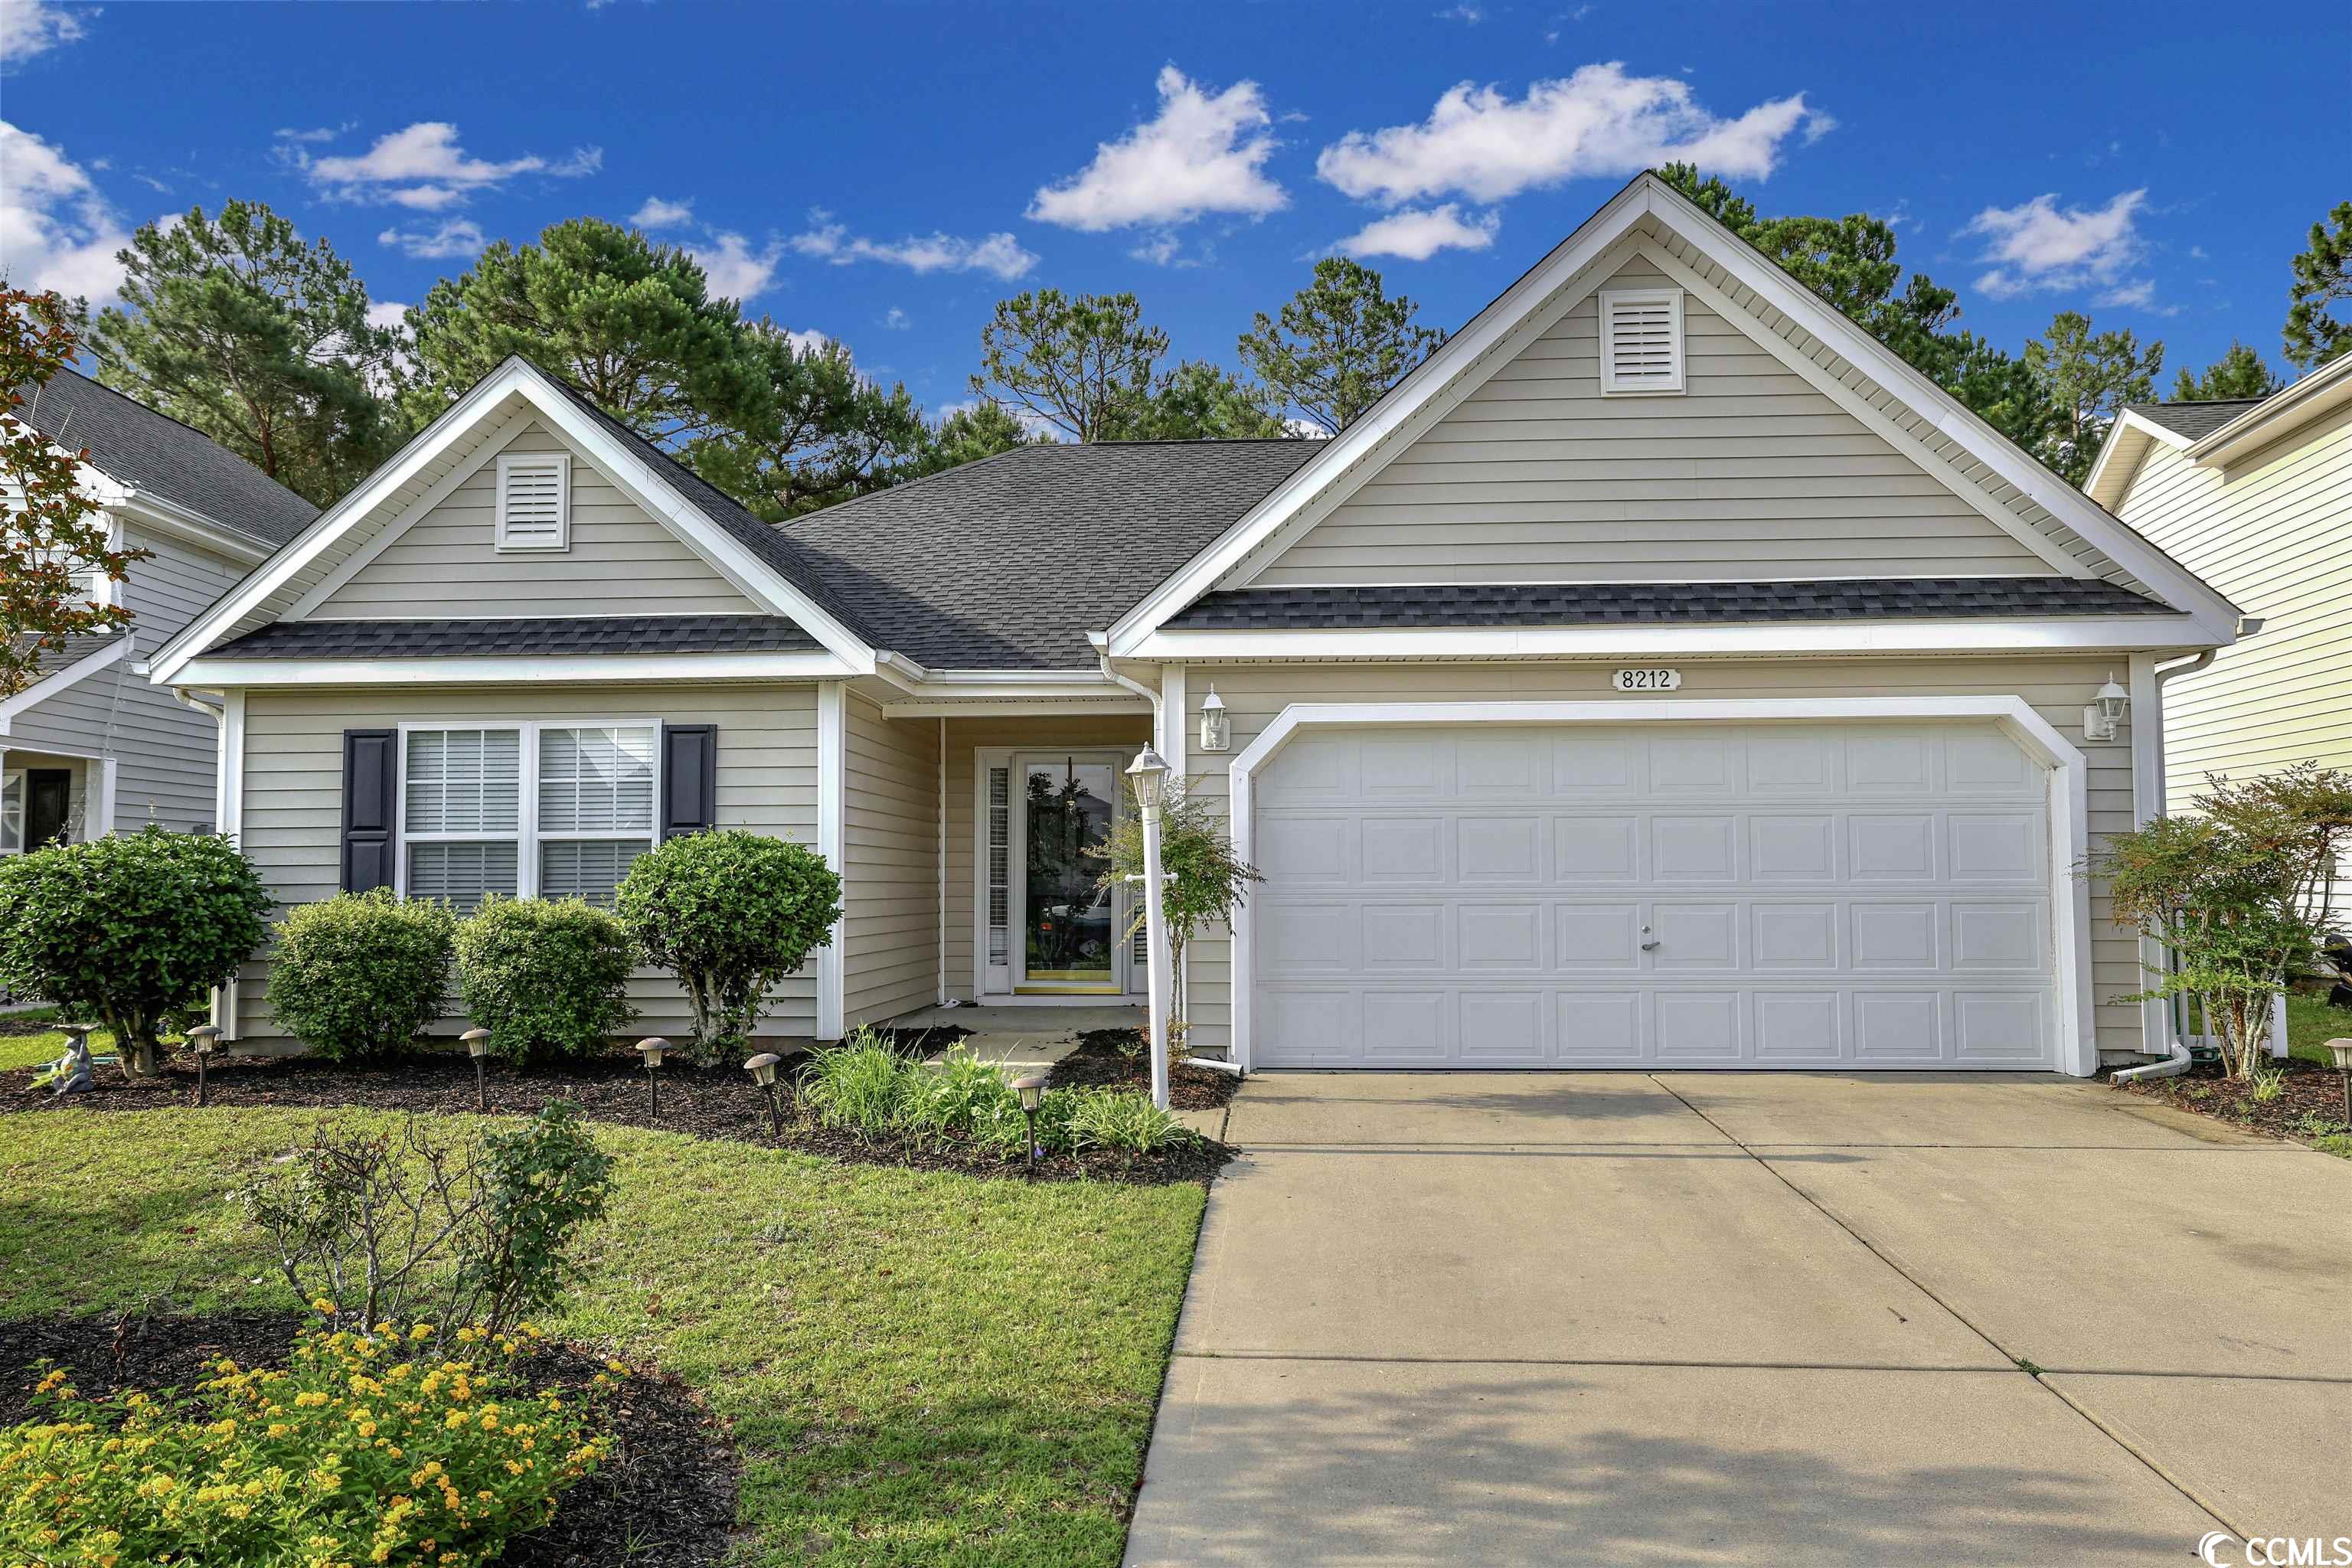 8212 Sterling Place Ct. Myrtle Beach, SC 29579